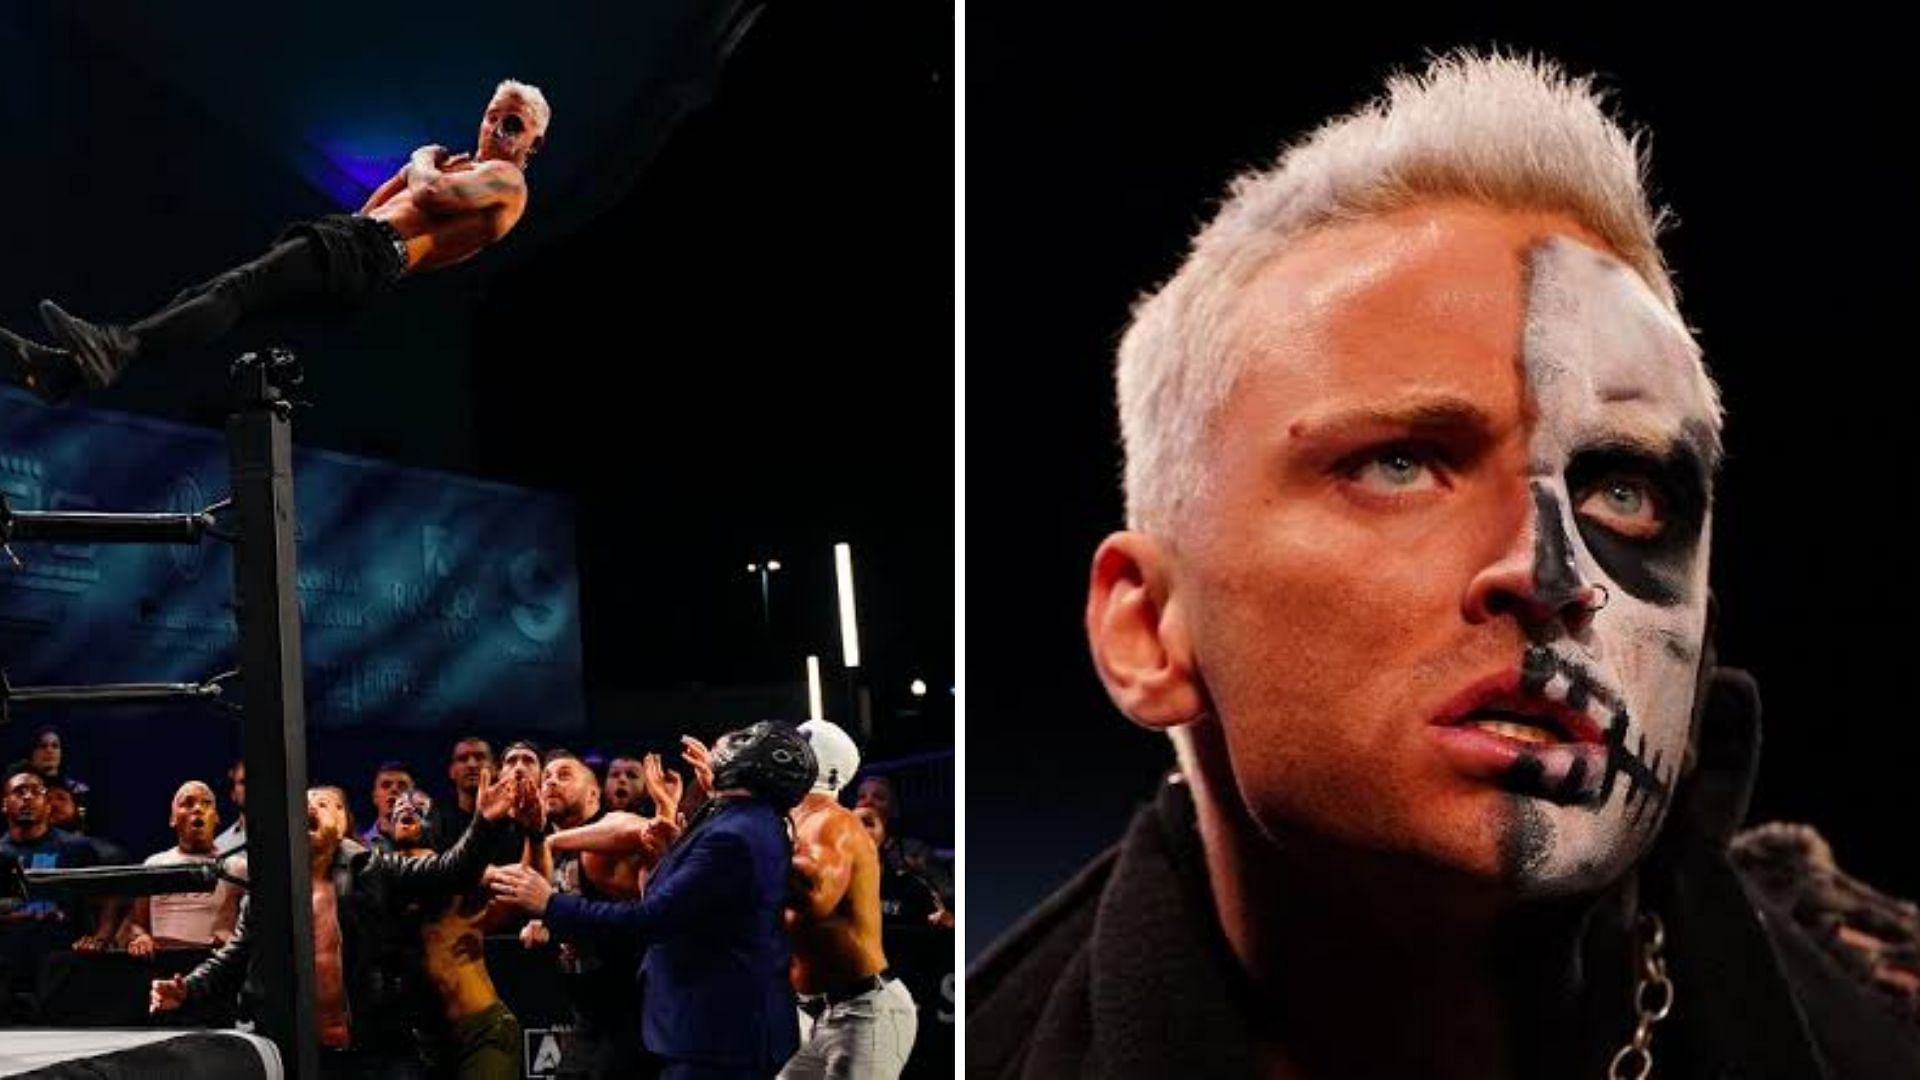 Darby Allin is one of the most dangerous performers in wrestling.